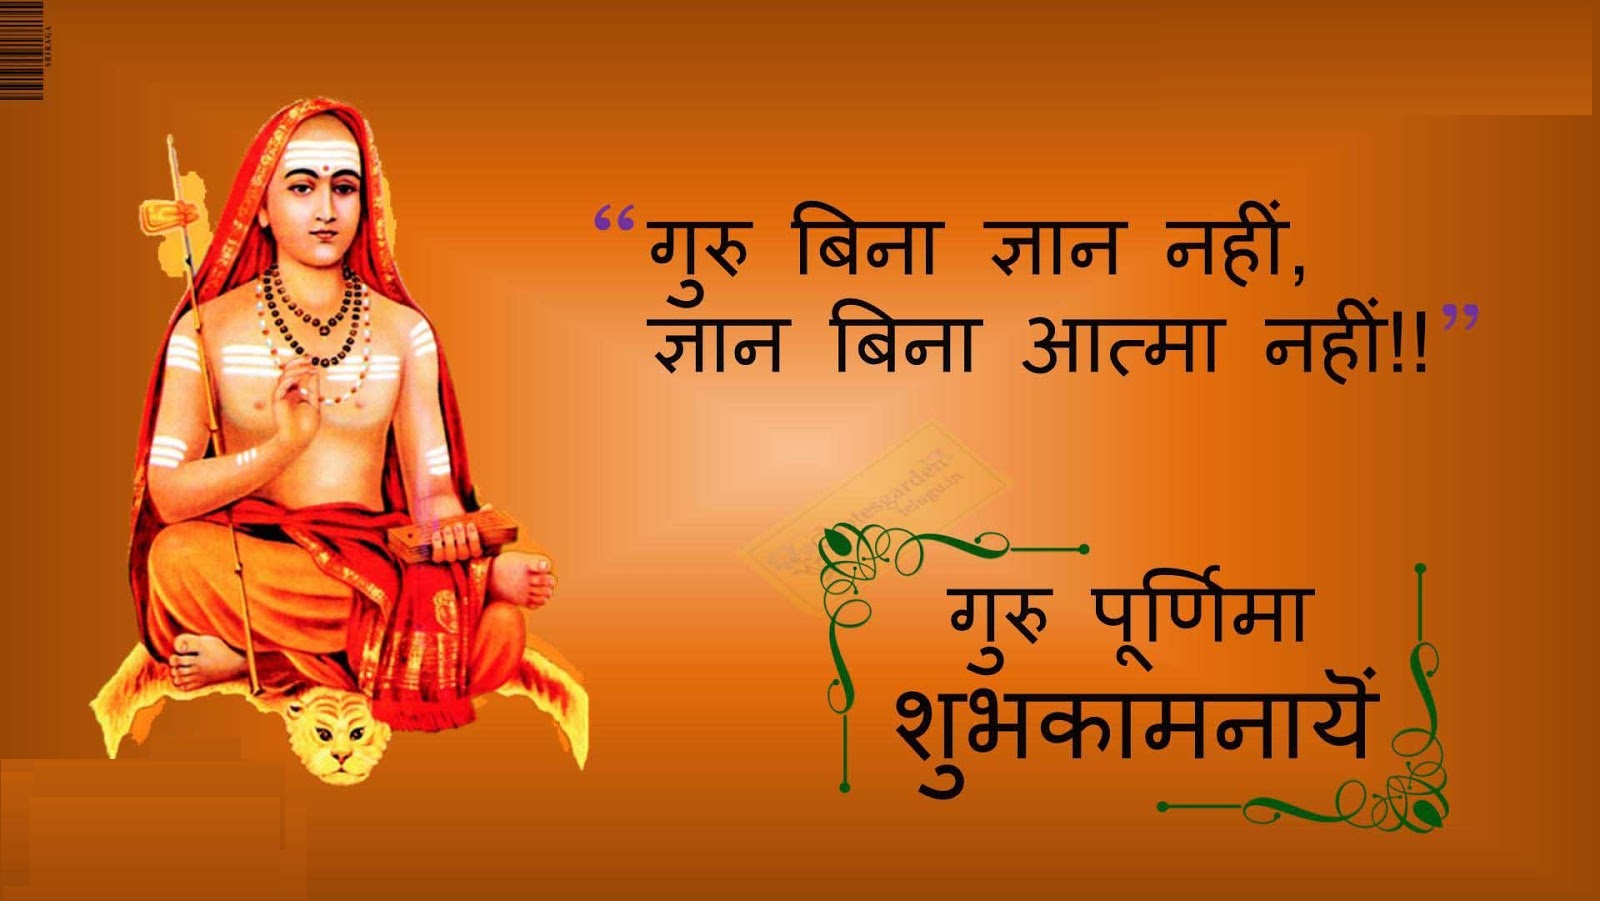 guru purnima 2019 greetings cards images in hindi with best wishes